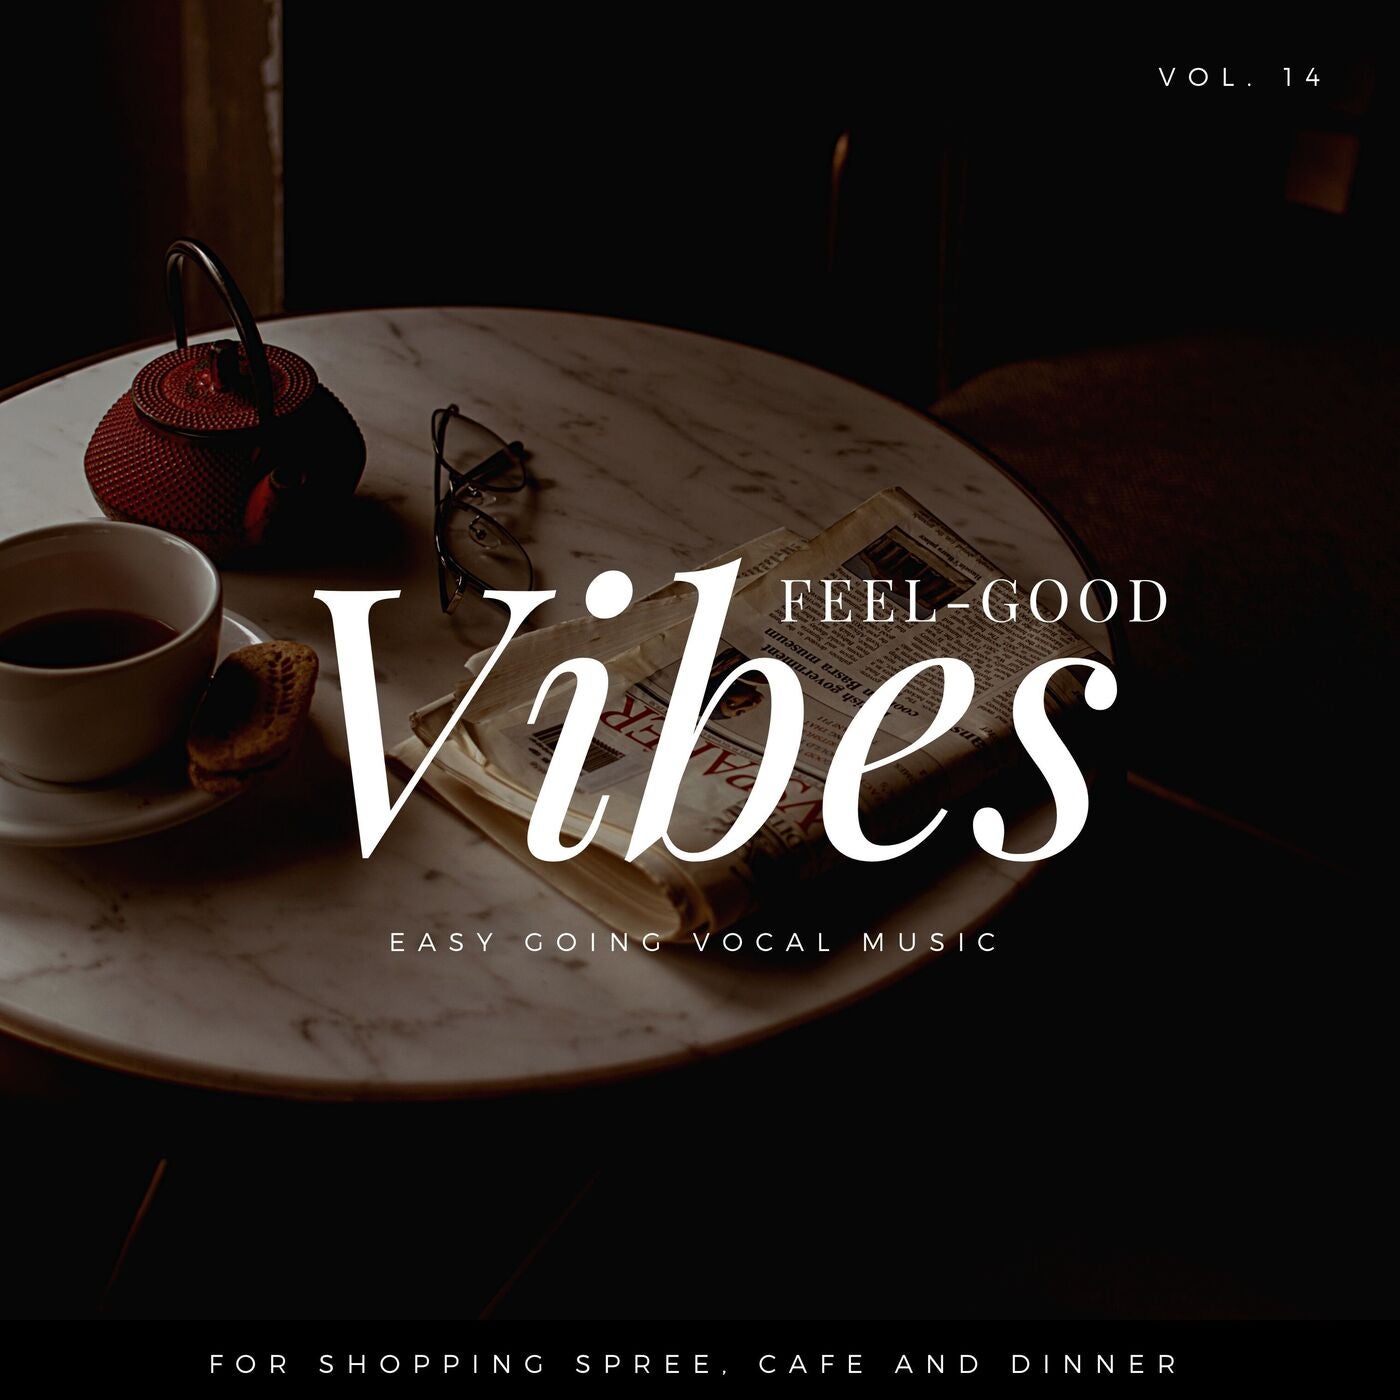 Feel-Good Vibes - Easy Going Vocal Music For Shopping Spree, Cafe And Dinner, Vol. 14